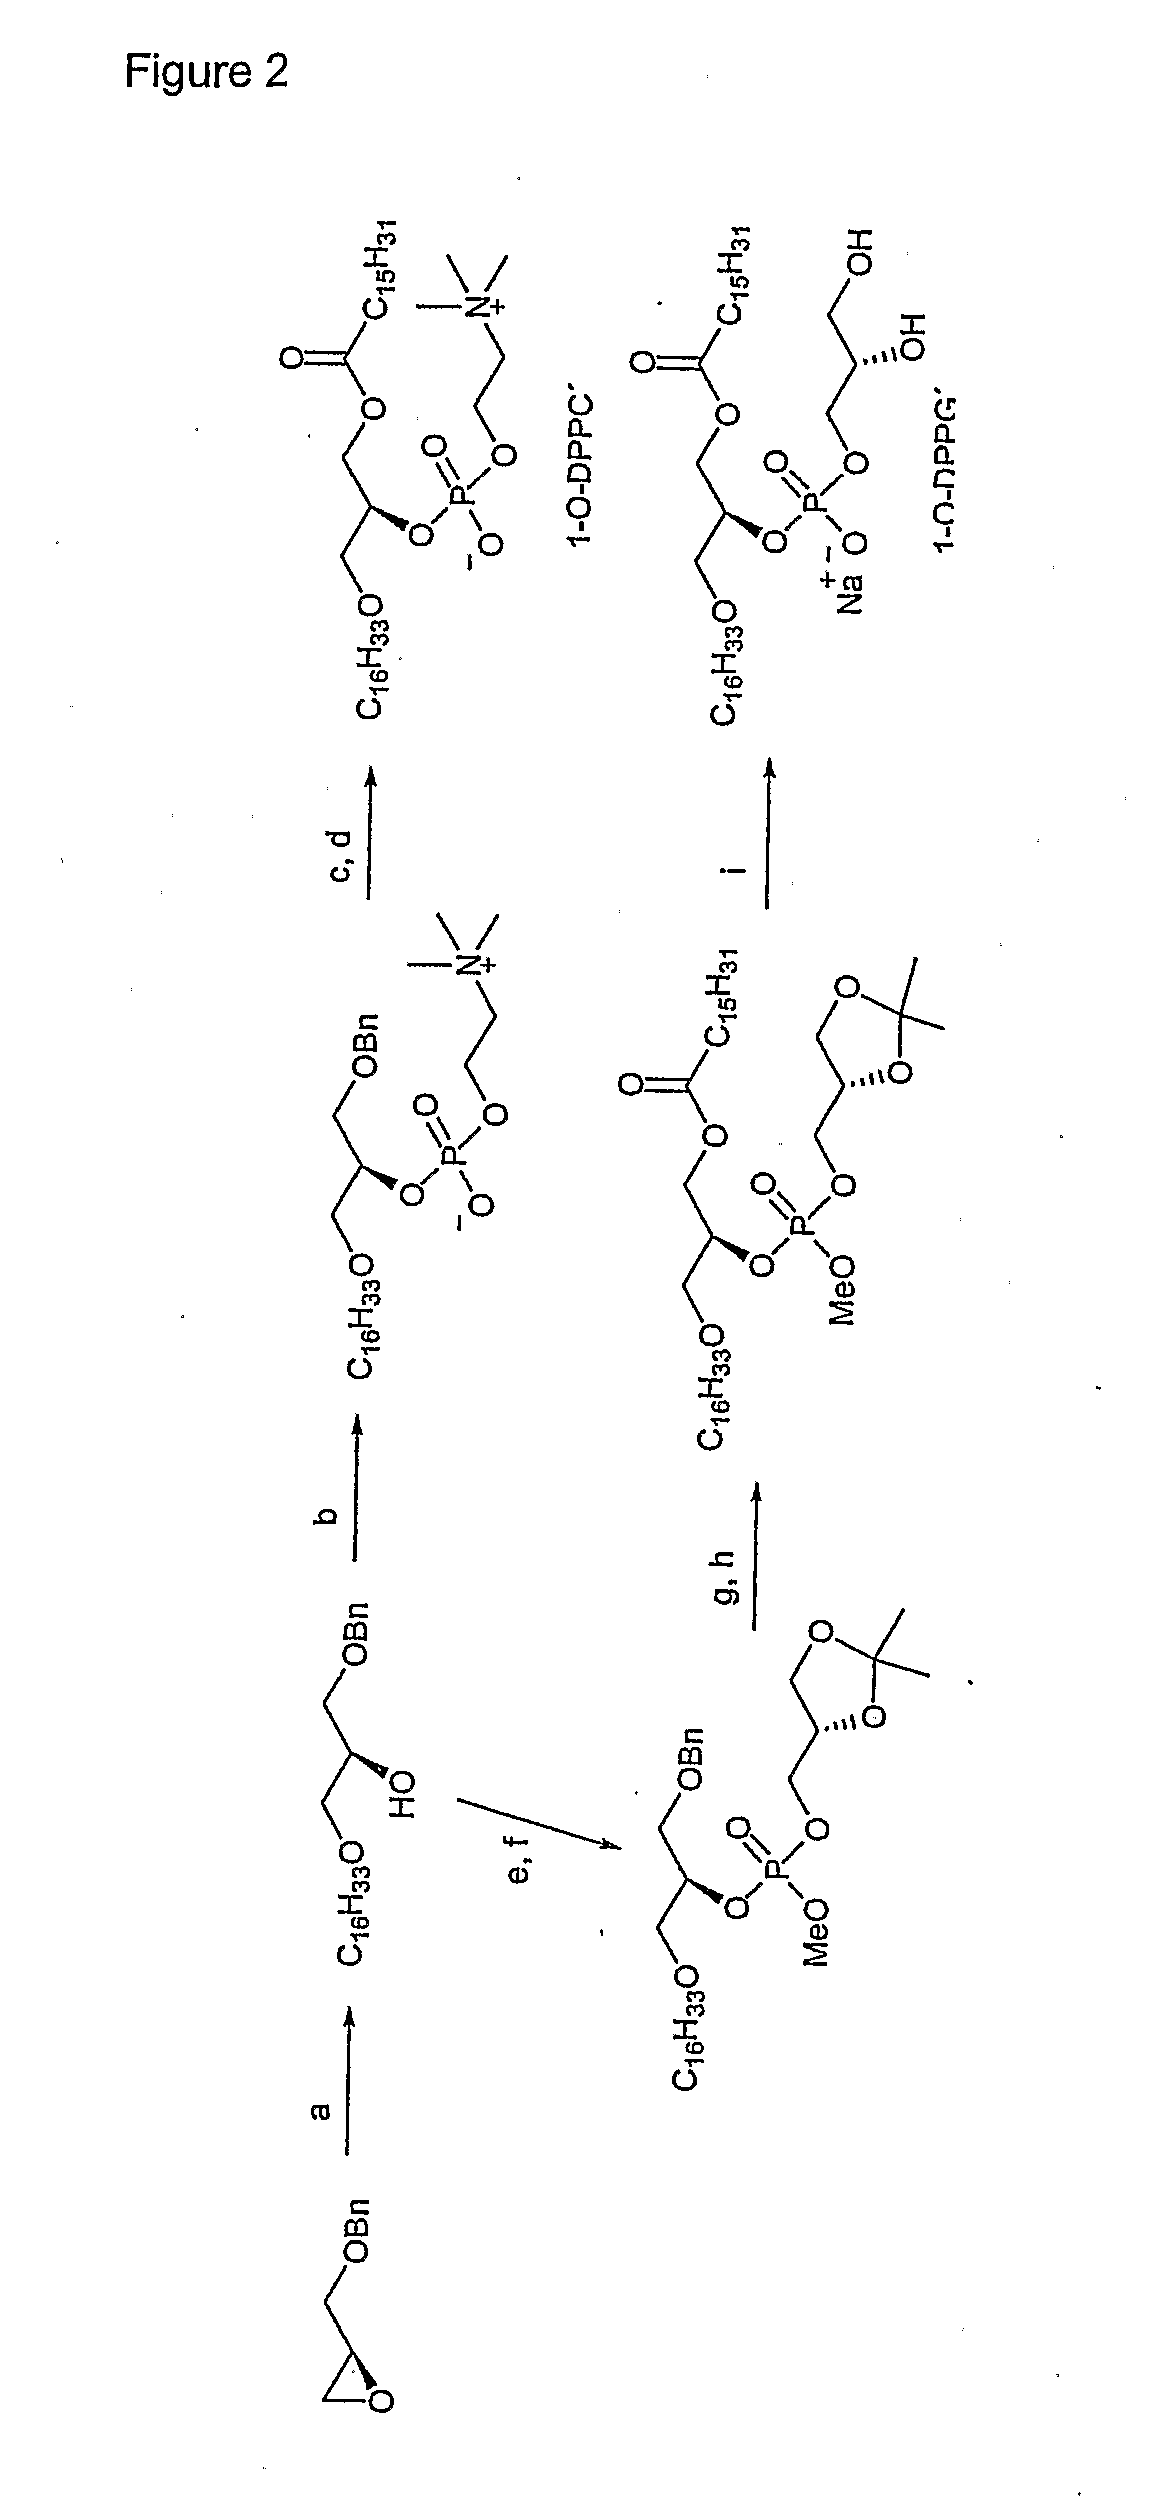 Lipid-Based Drug Delivery Systems Containing Unnatural Phospholipase A2 Degradable Lipid Derivatives and the Therapeutic Uses Thereof